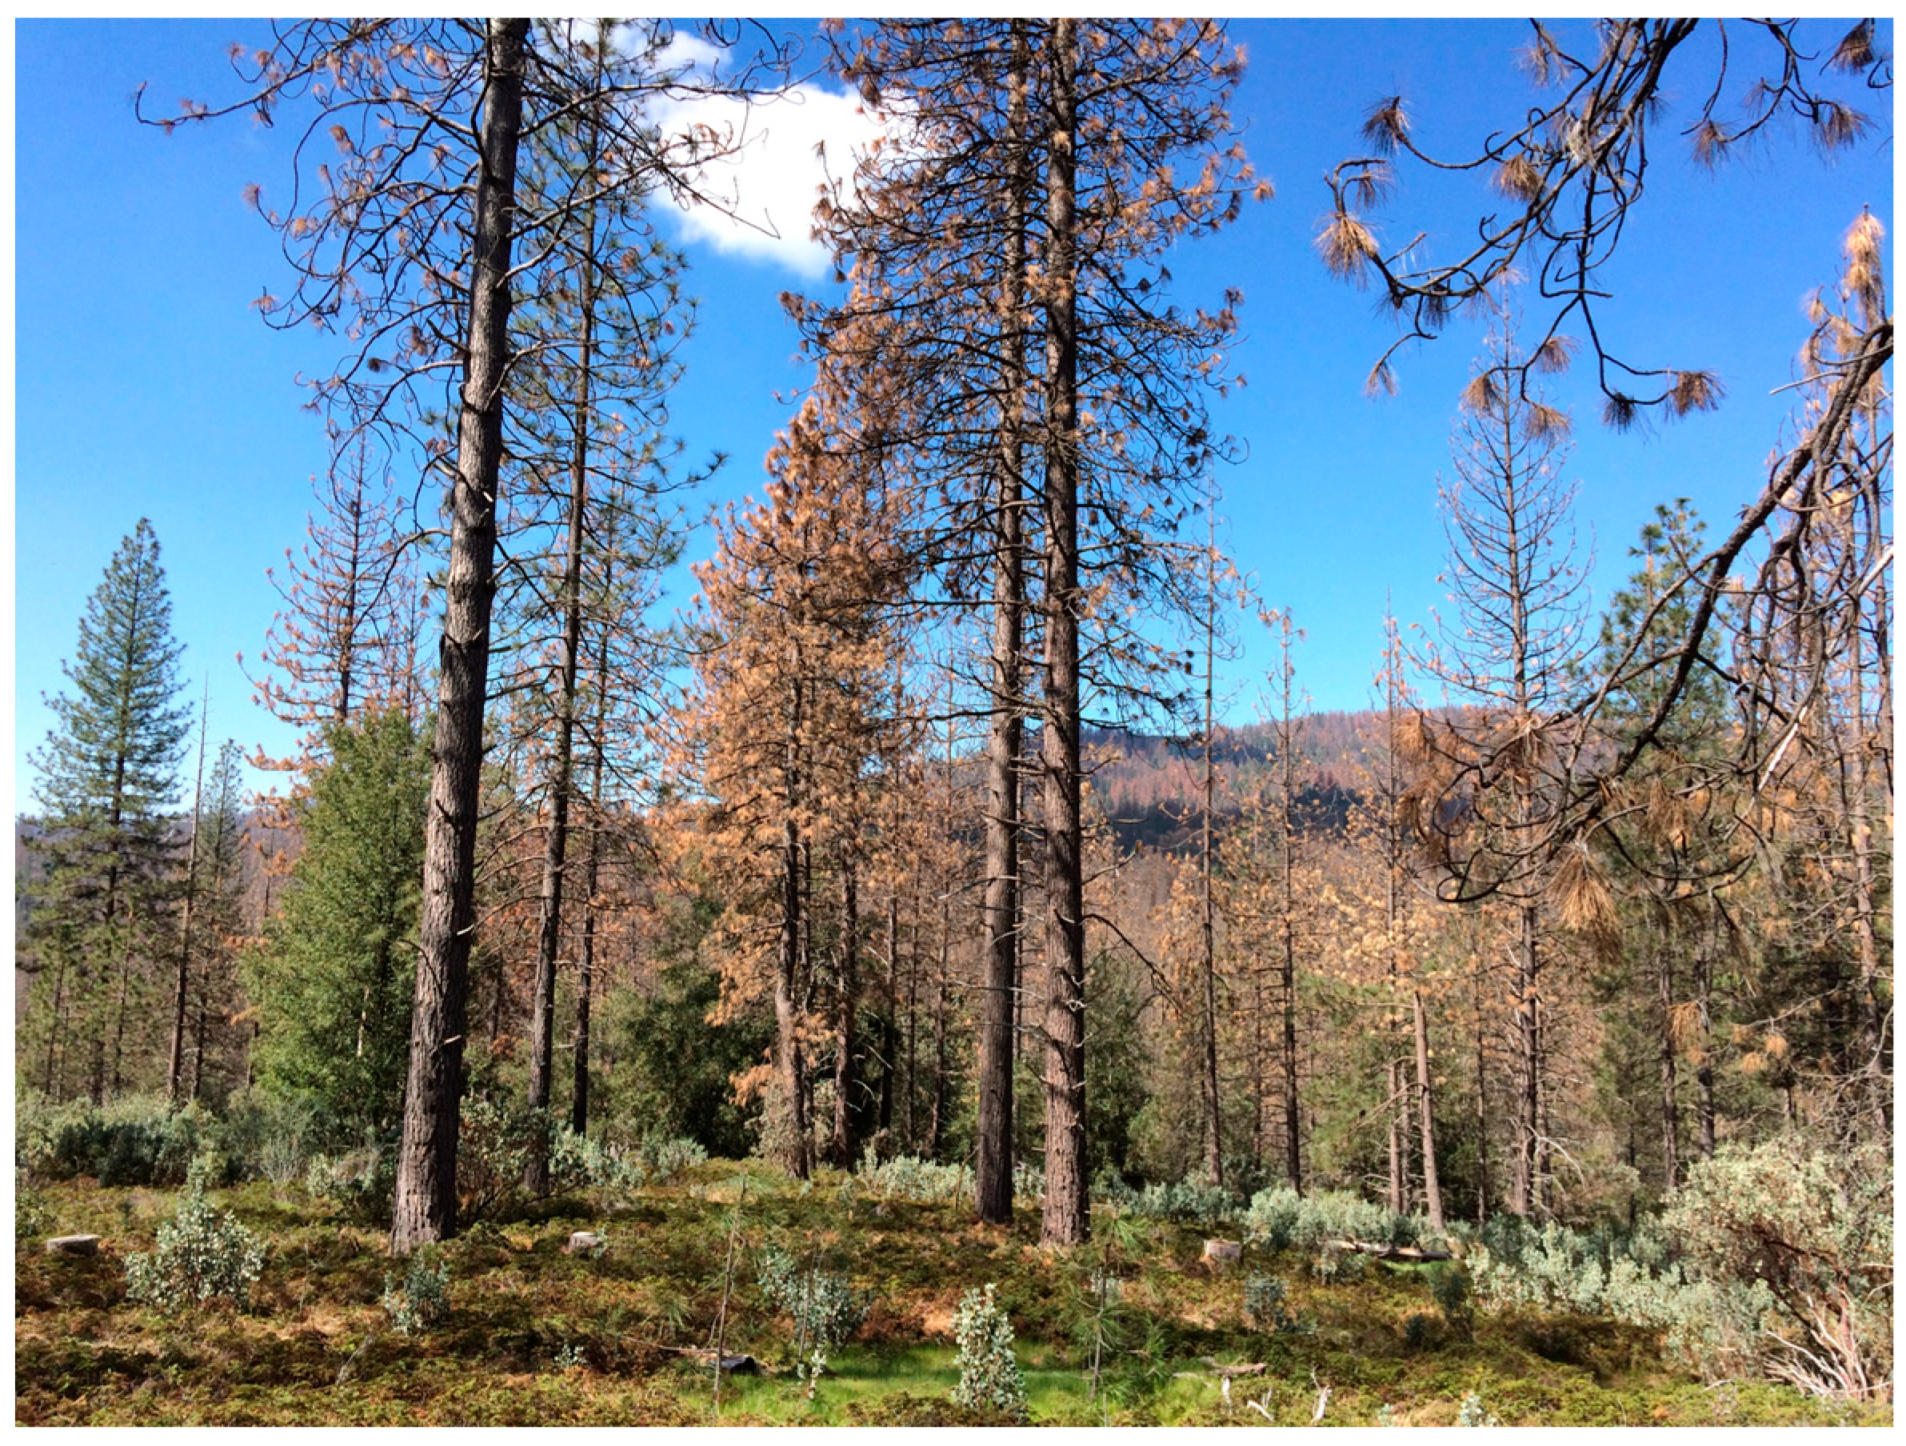 Forests Free Full-Text Applied Chemical Ecology of the Western Pine Beetle, an Important Pest of Ponderosa Pine in Western North America